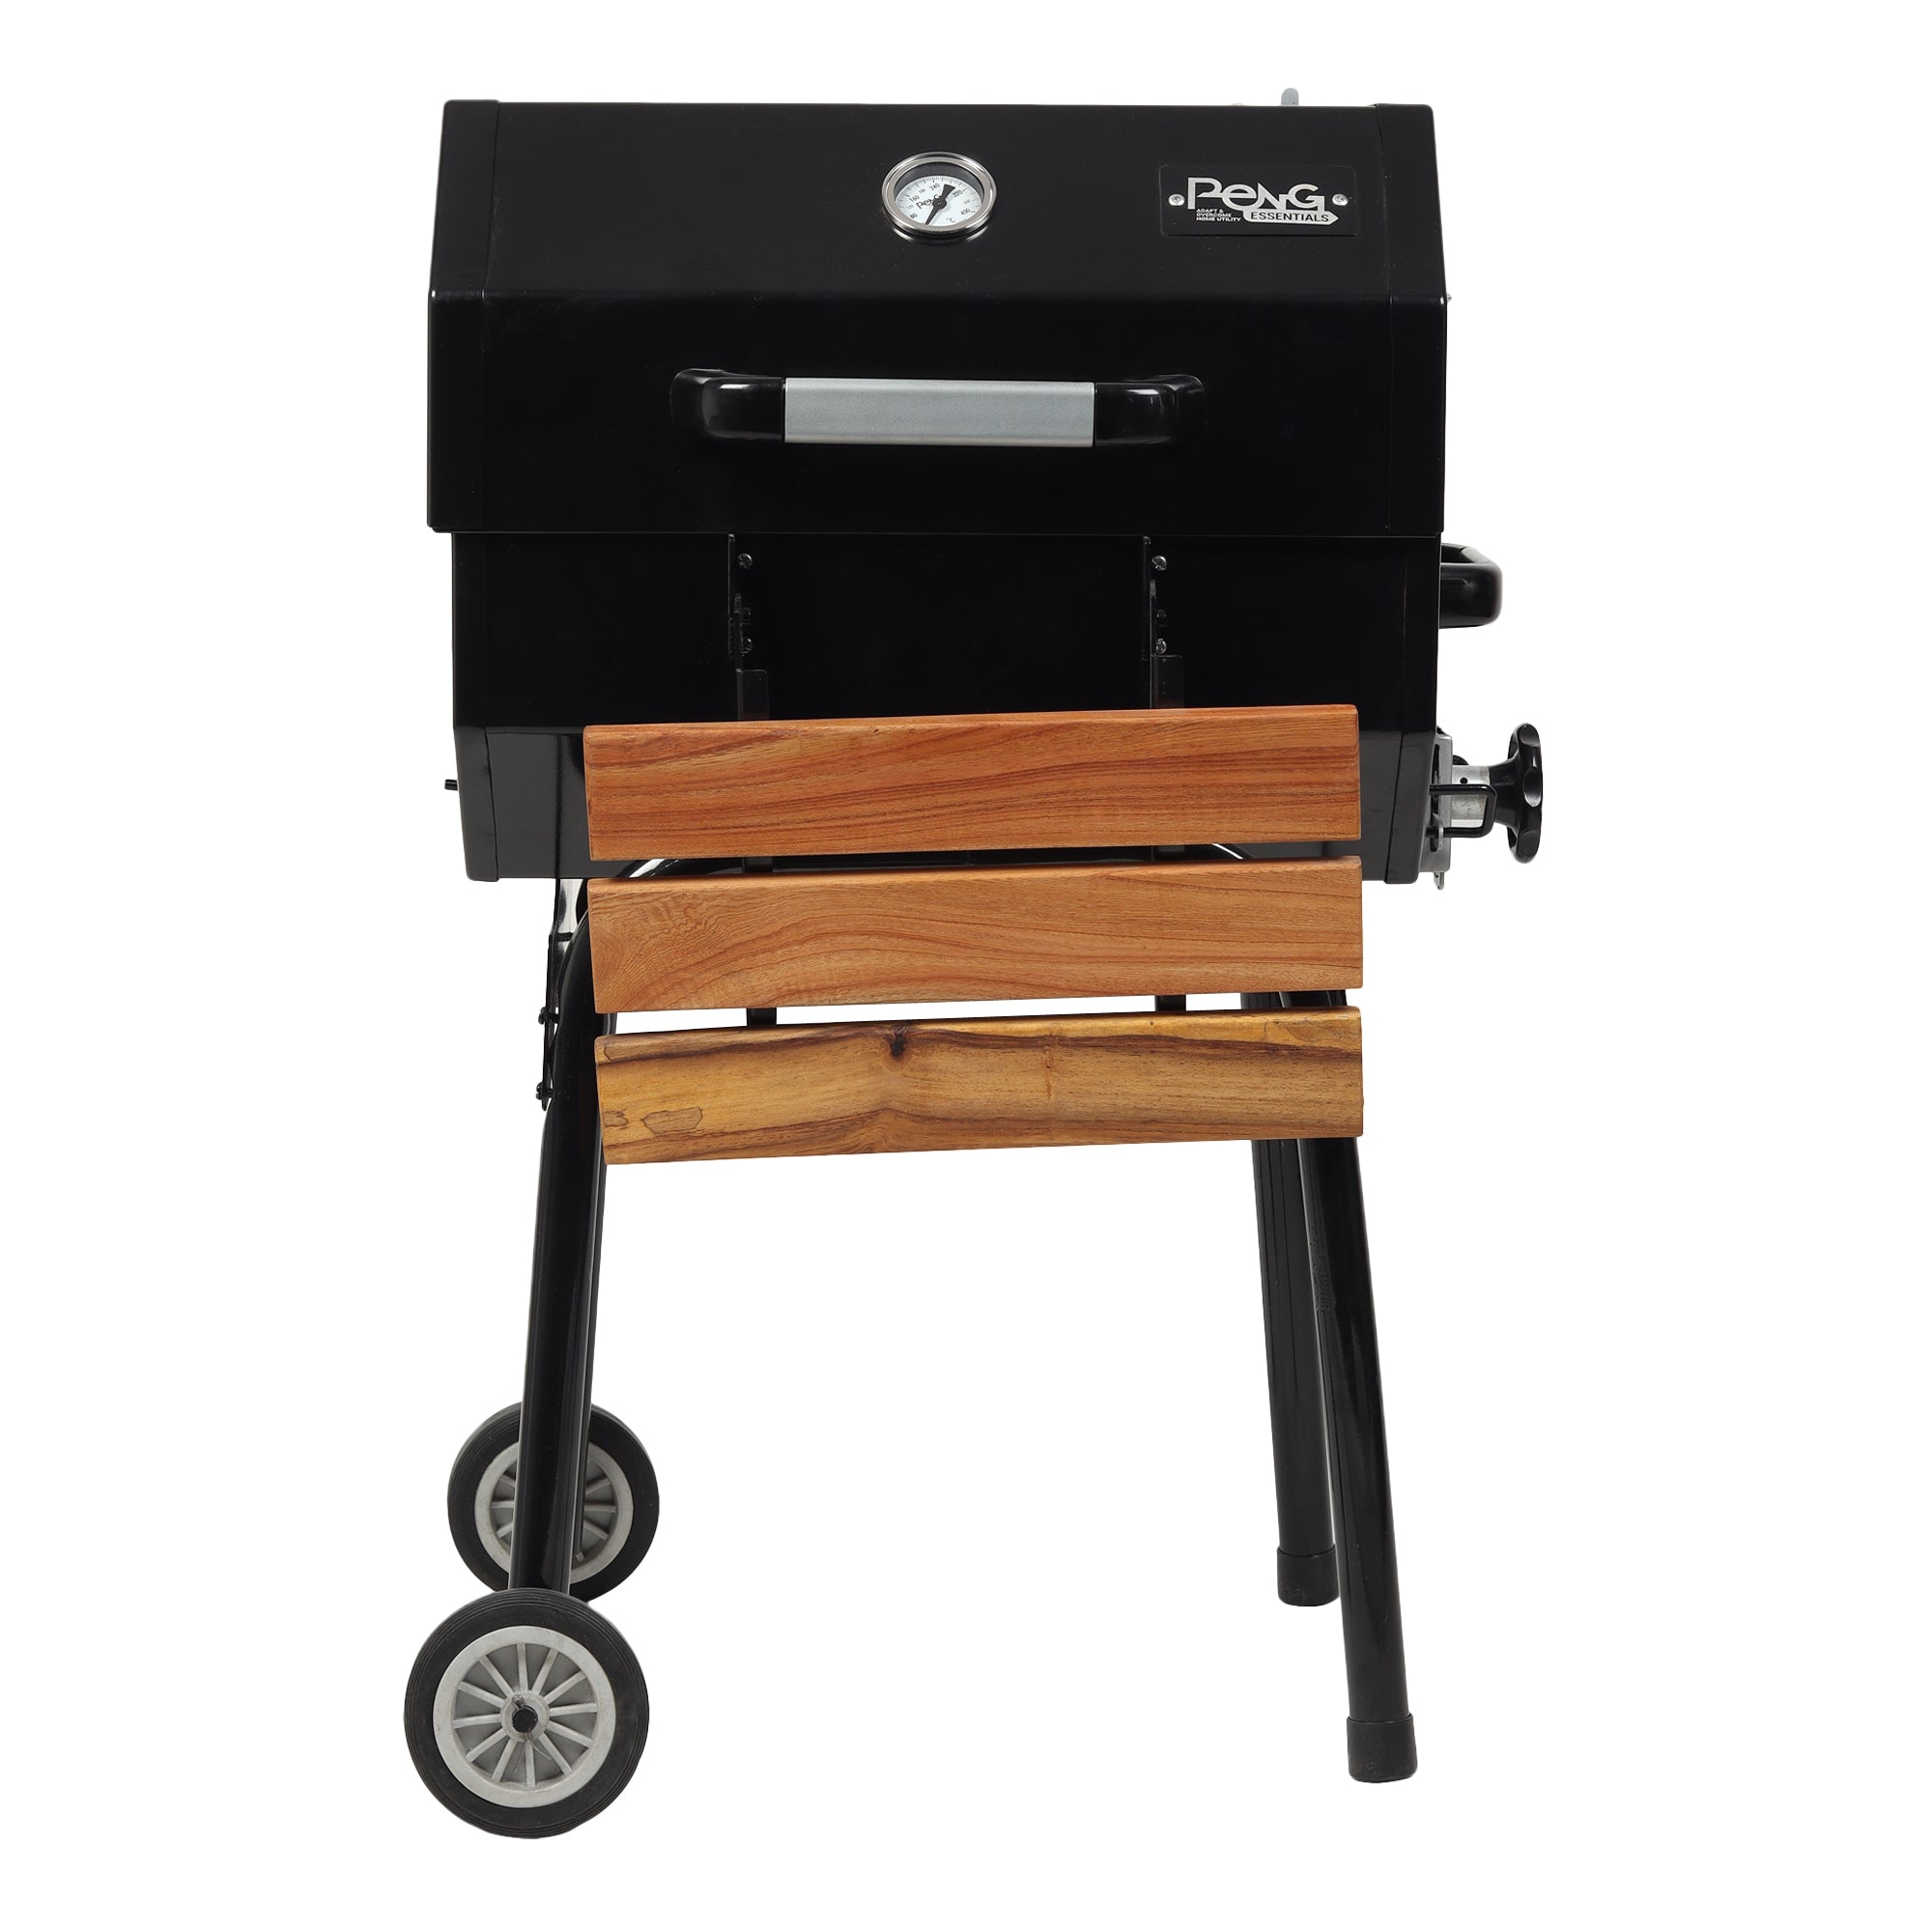 FlameMaster Pro Barbeque Grill set for Home | Large Cooking Area, Easy Assemble, Additional Warming Rack | Charcoal Griller BBQ With 5 Wooden Skewers, 1 Tong